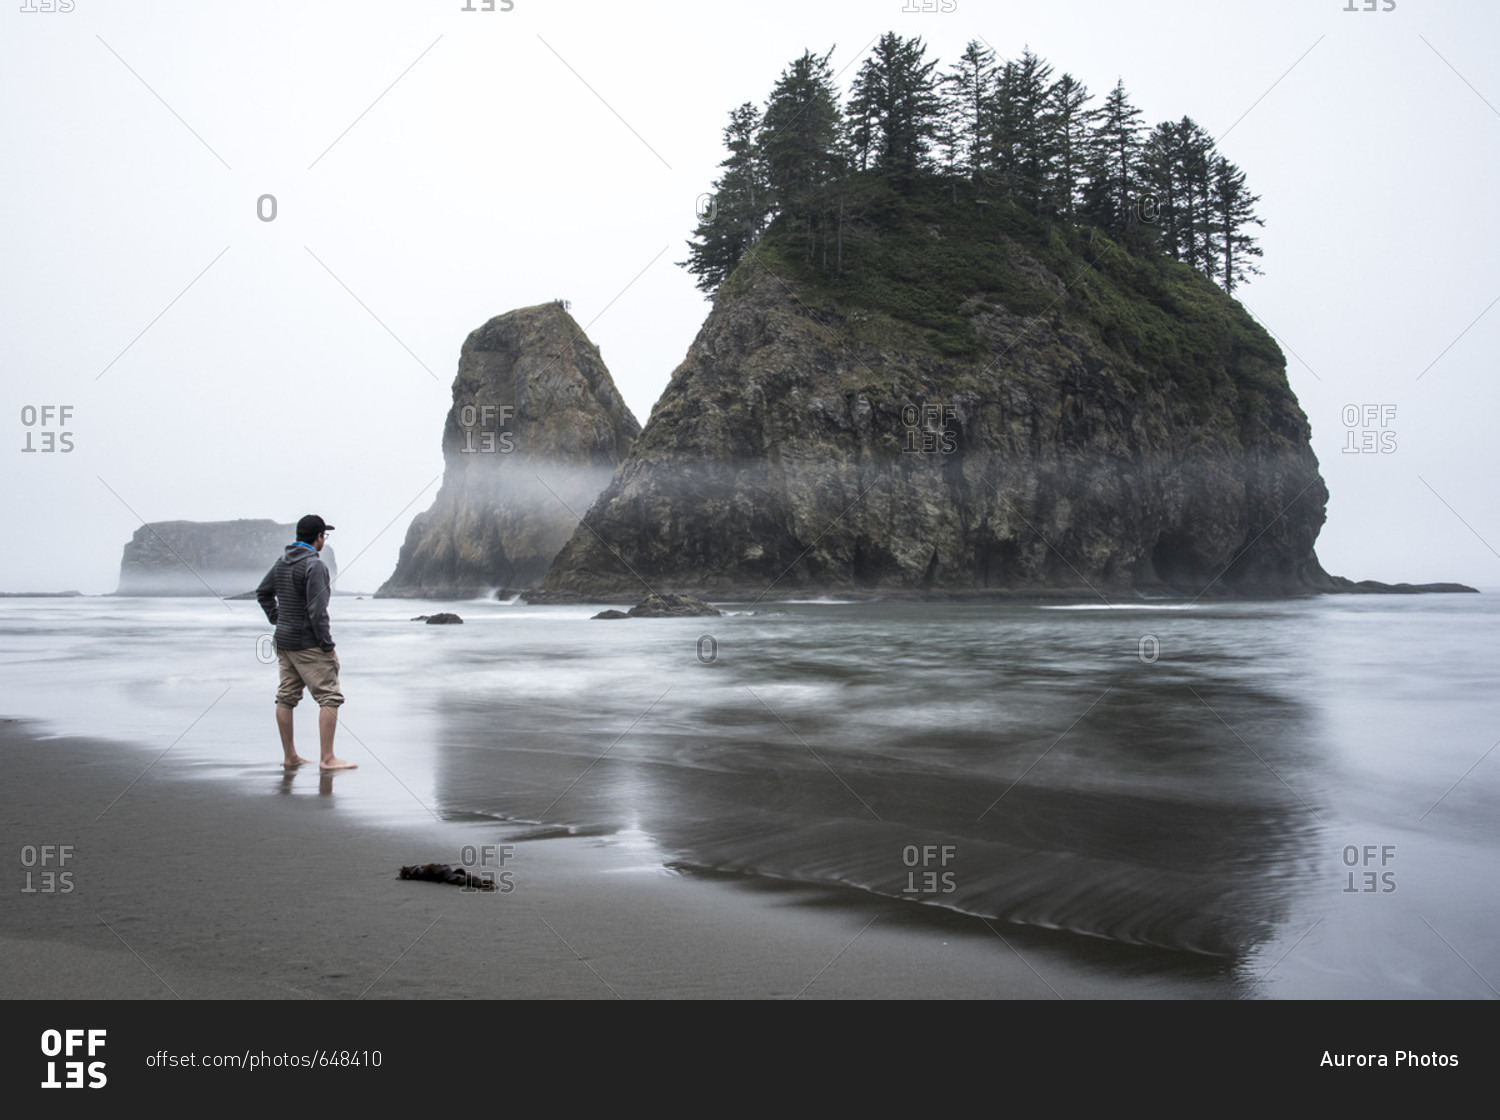 Man on beach looking at view of small rocky island with trees, Second Beach, La Push, Washington State, USA